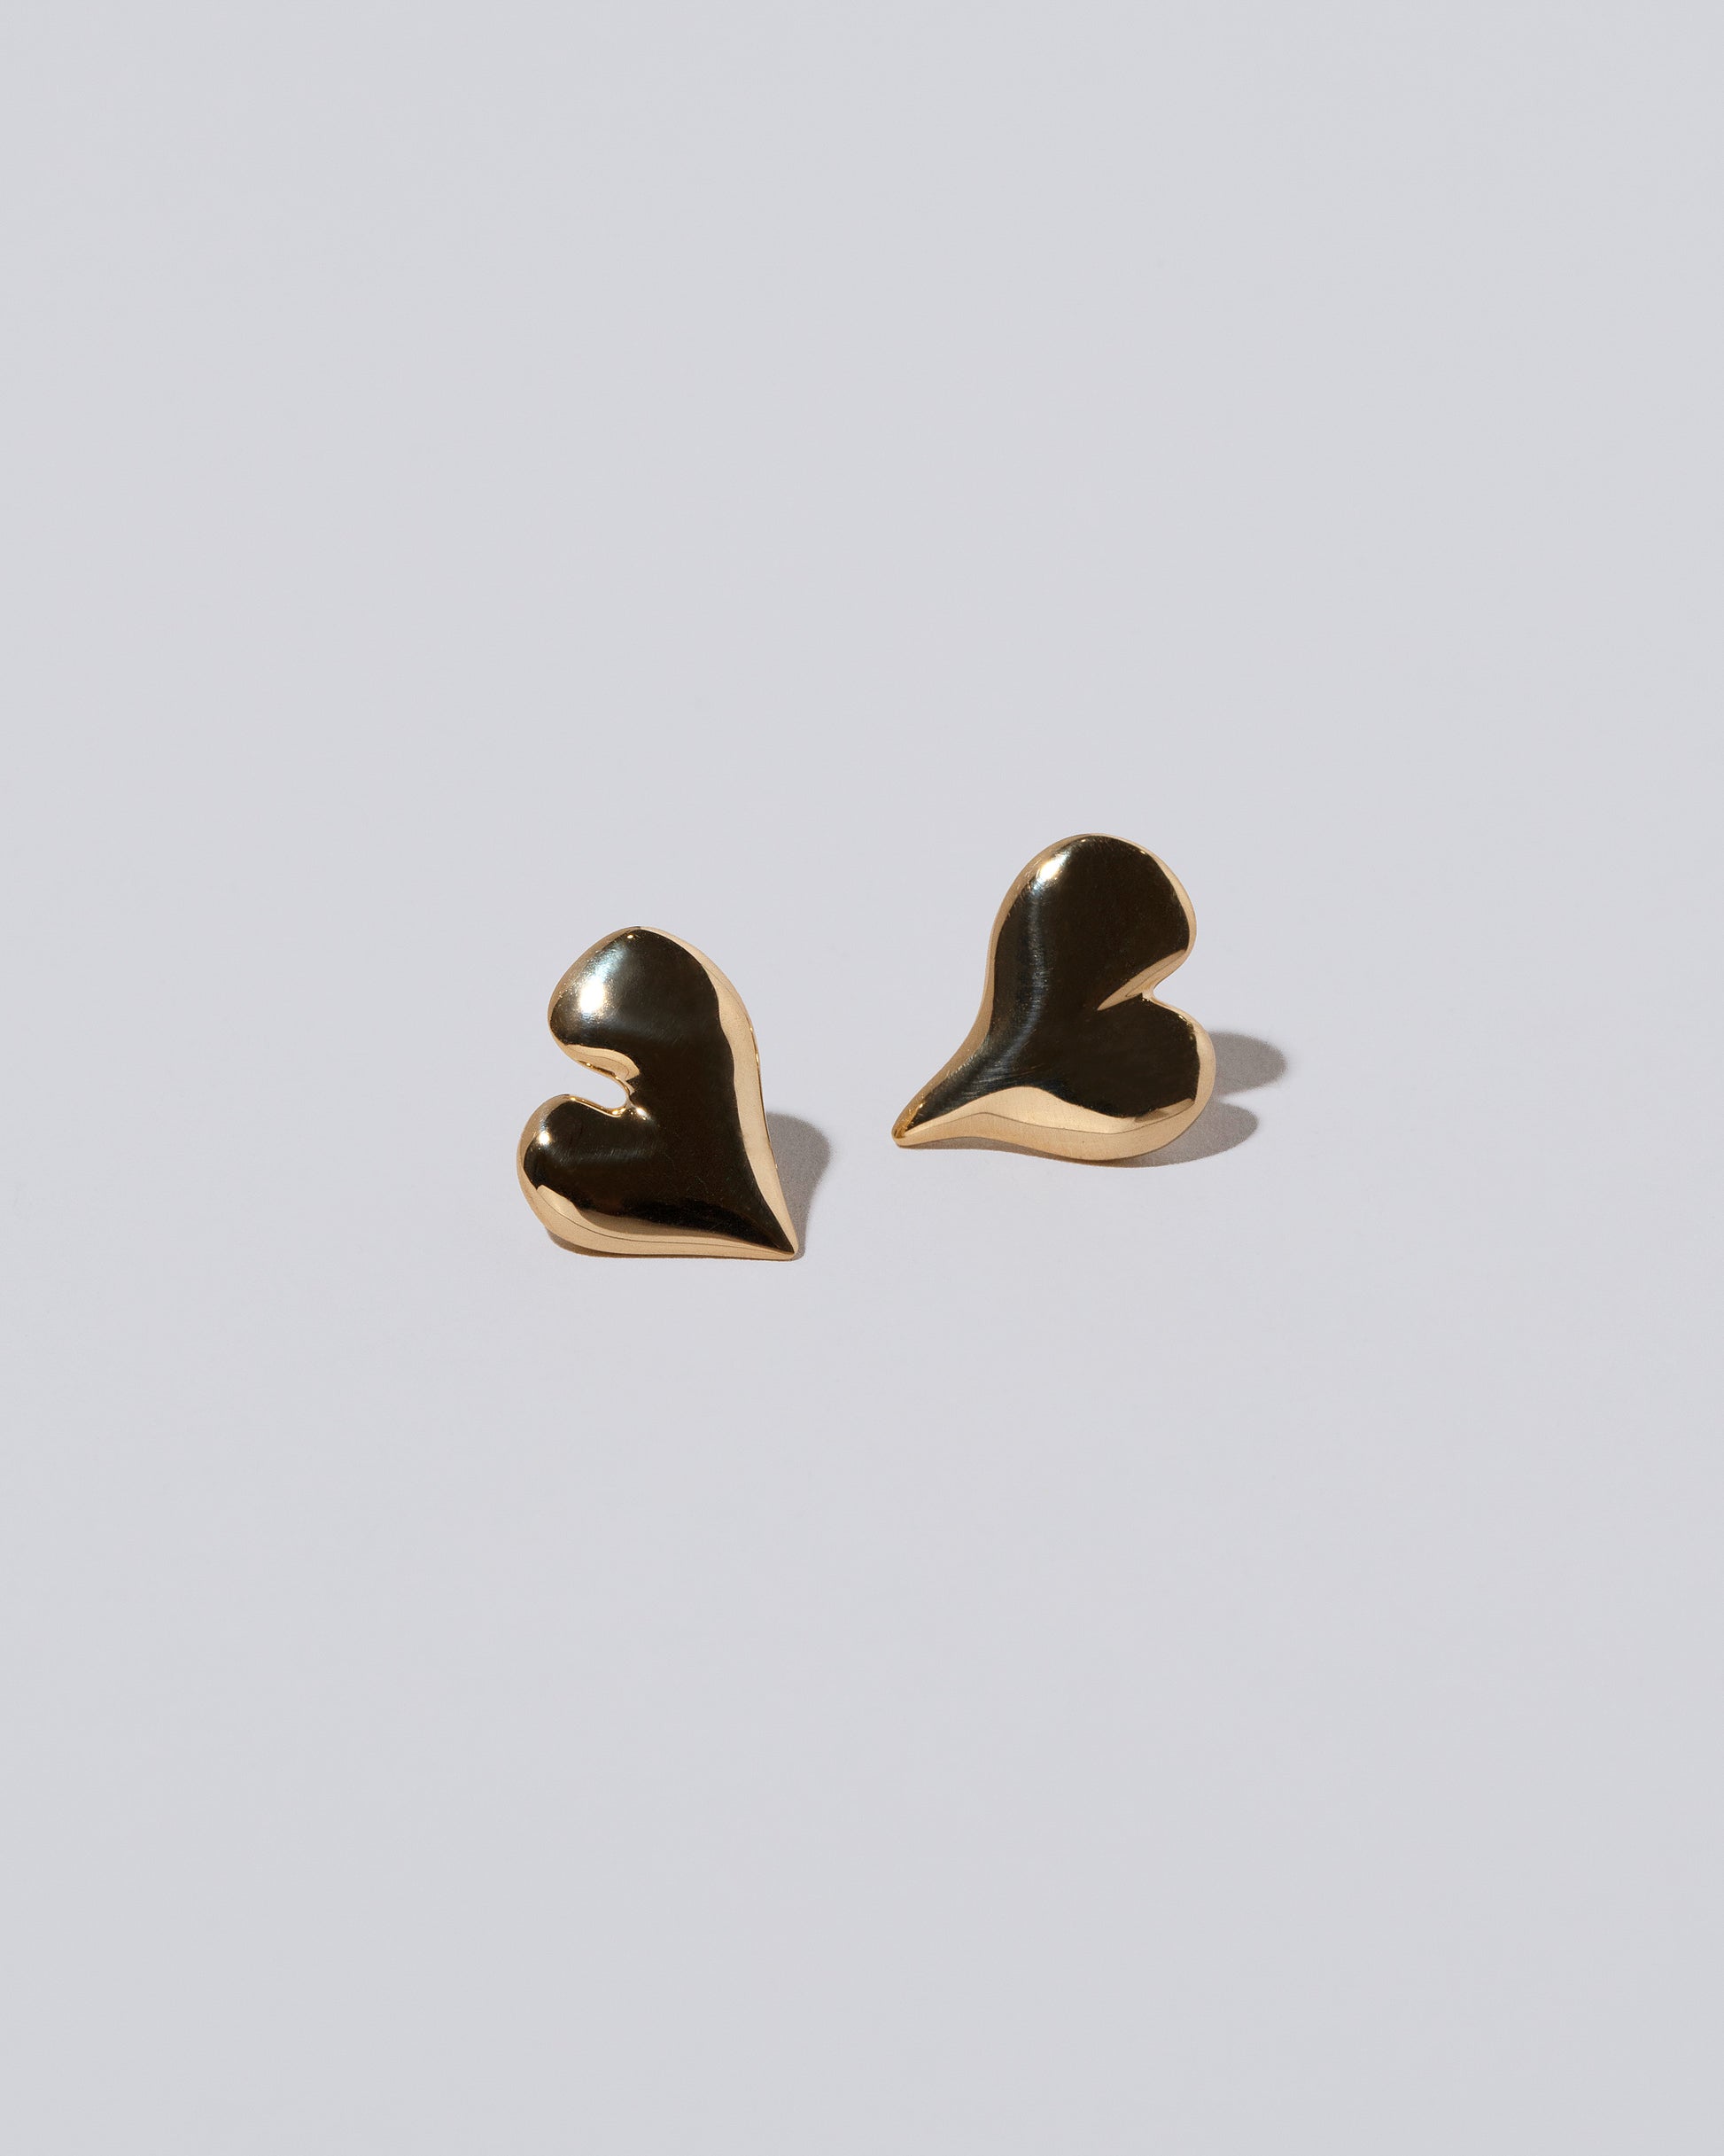 Thousand & One Night Heart Stud Earrings on light color background.